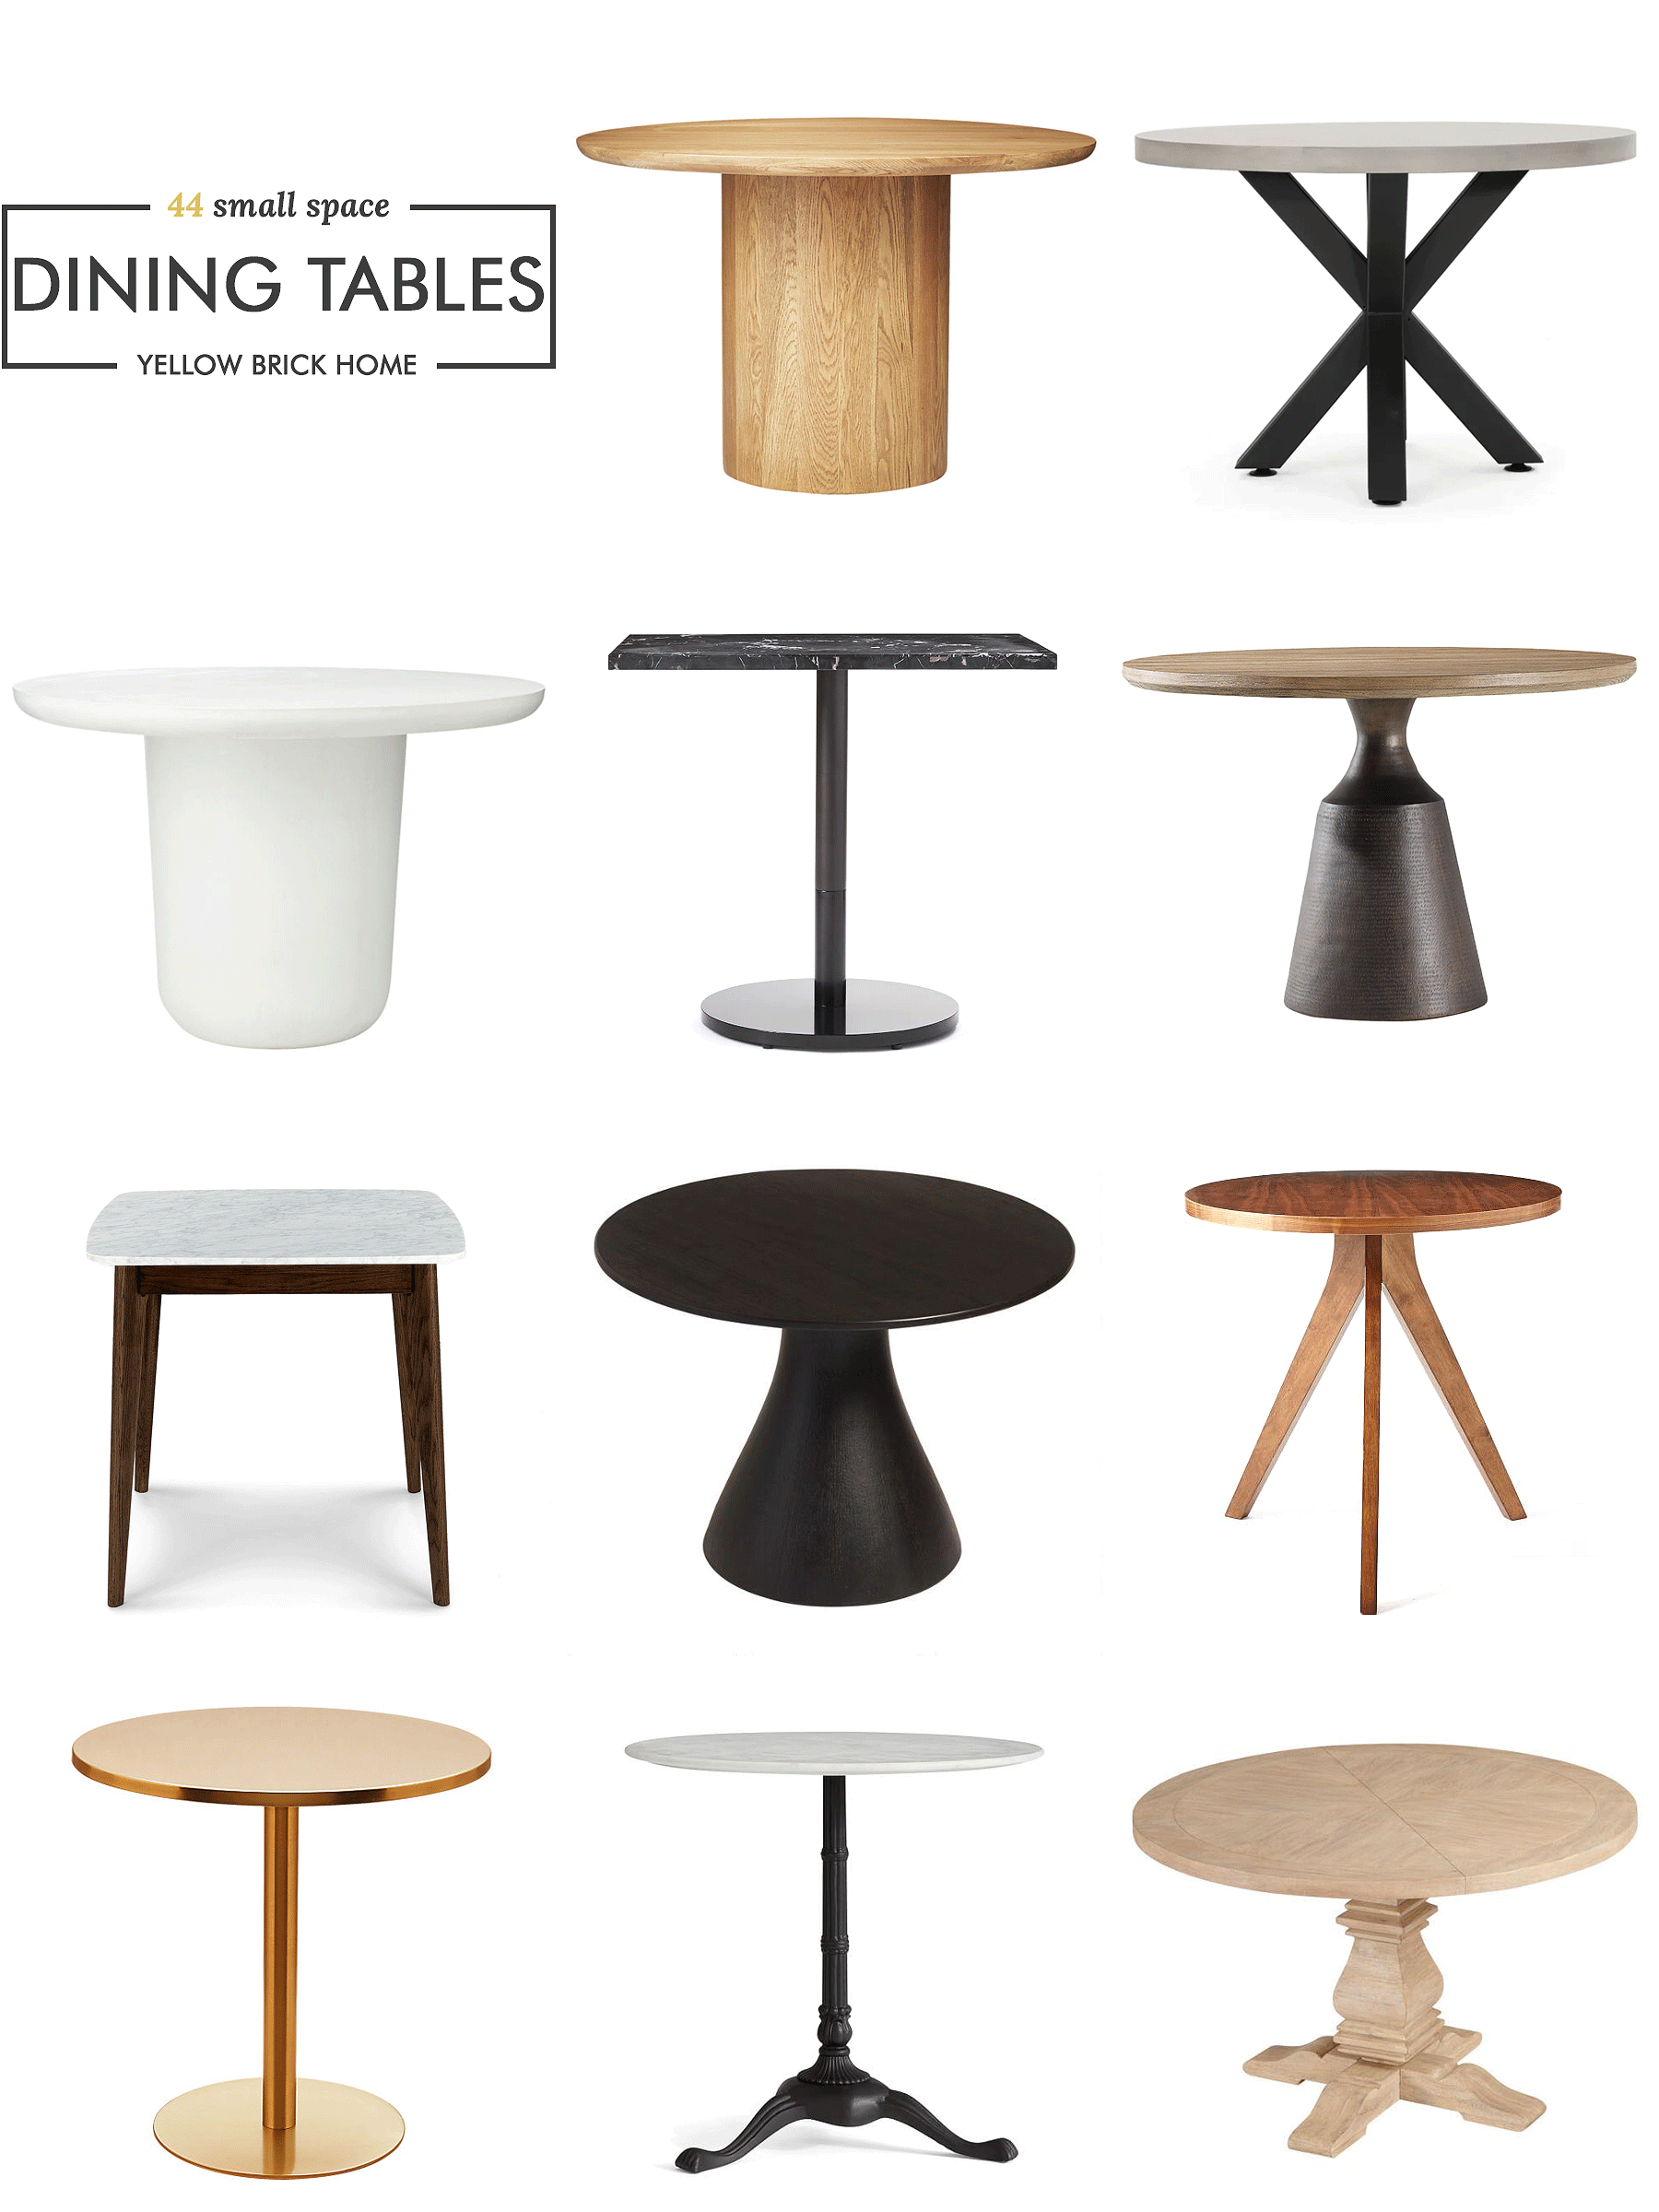 44 Dining Tables For When You Re Short, 44 Round Dining Table With Leaf